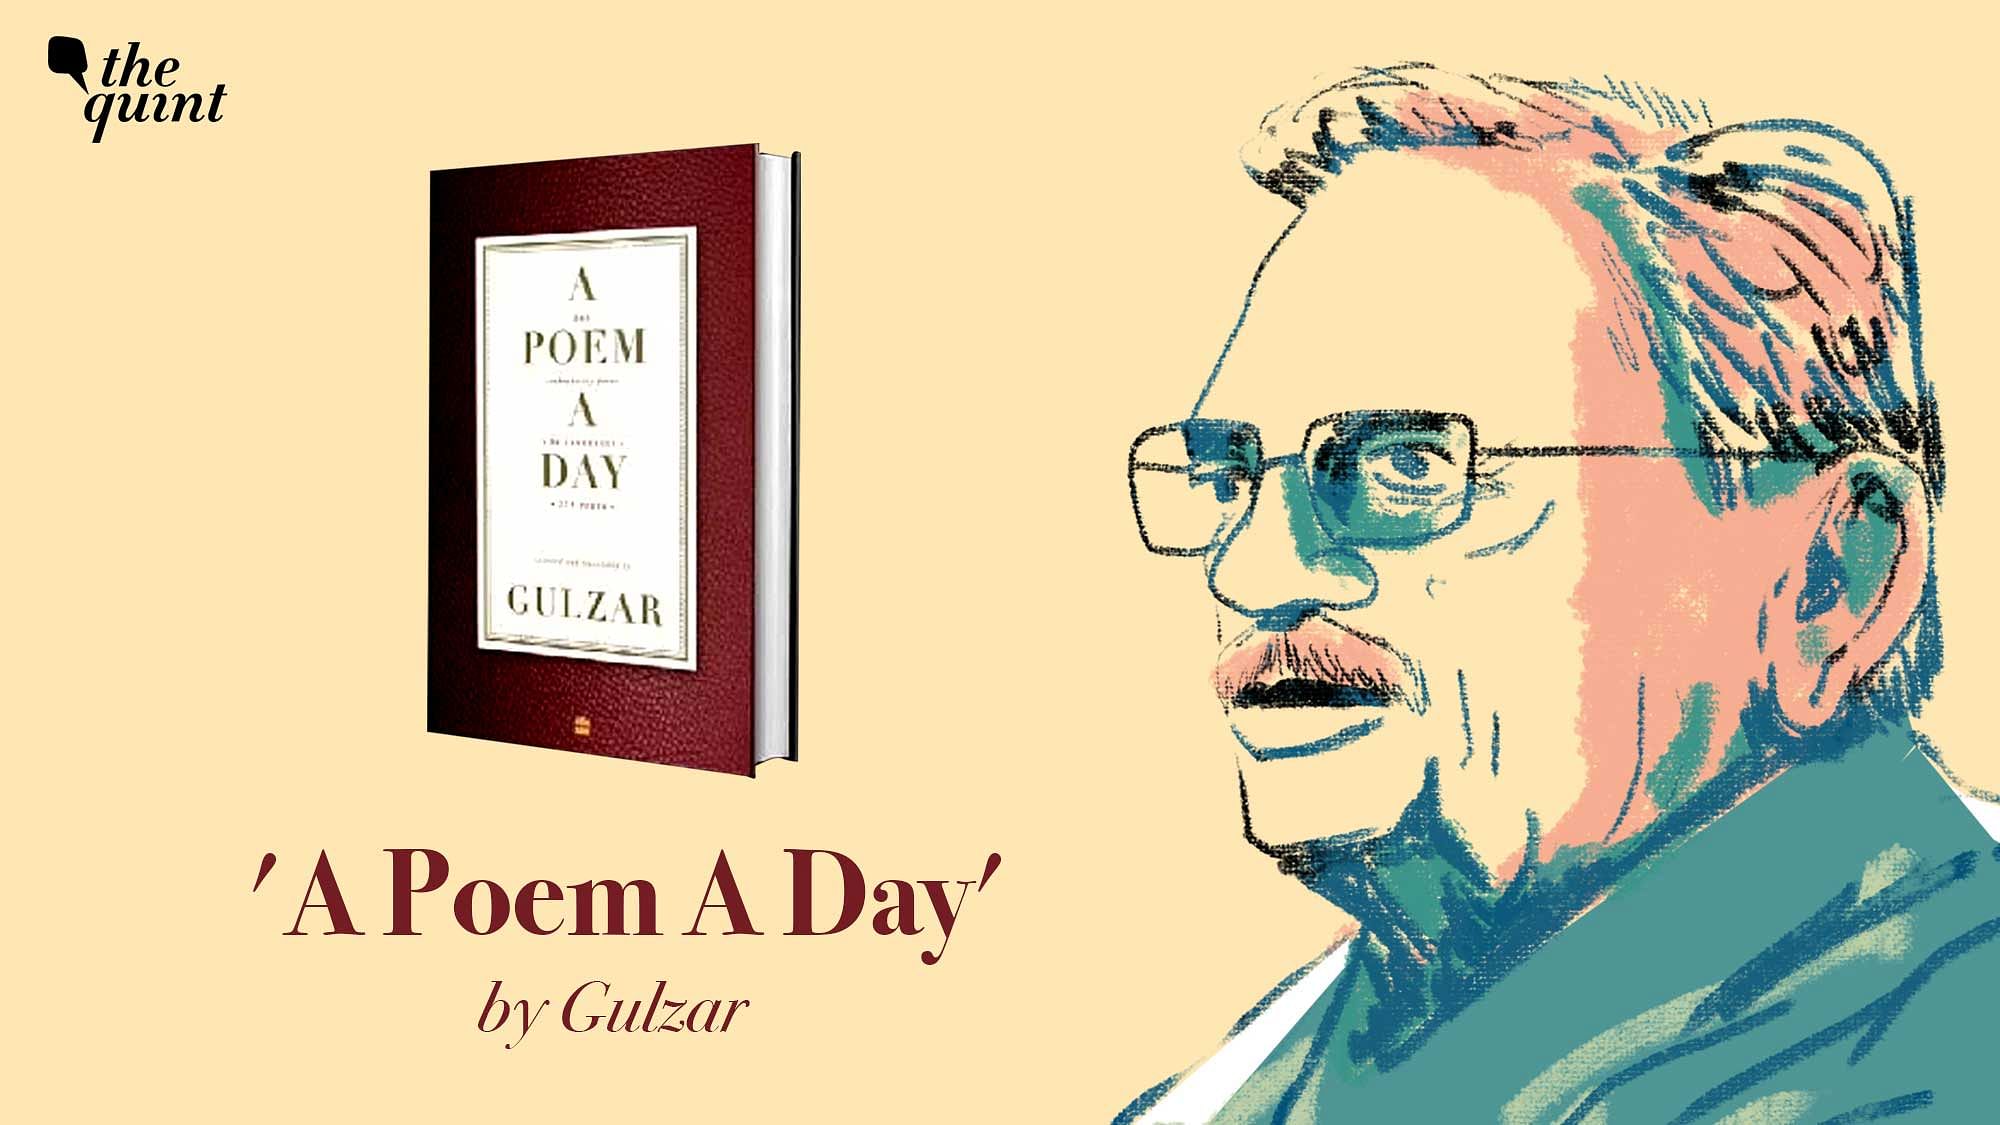 In this podcast, Gulzar reads his translations of the poem from the Northeast, Maharashtra and Punjab.